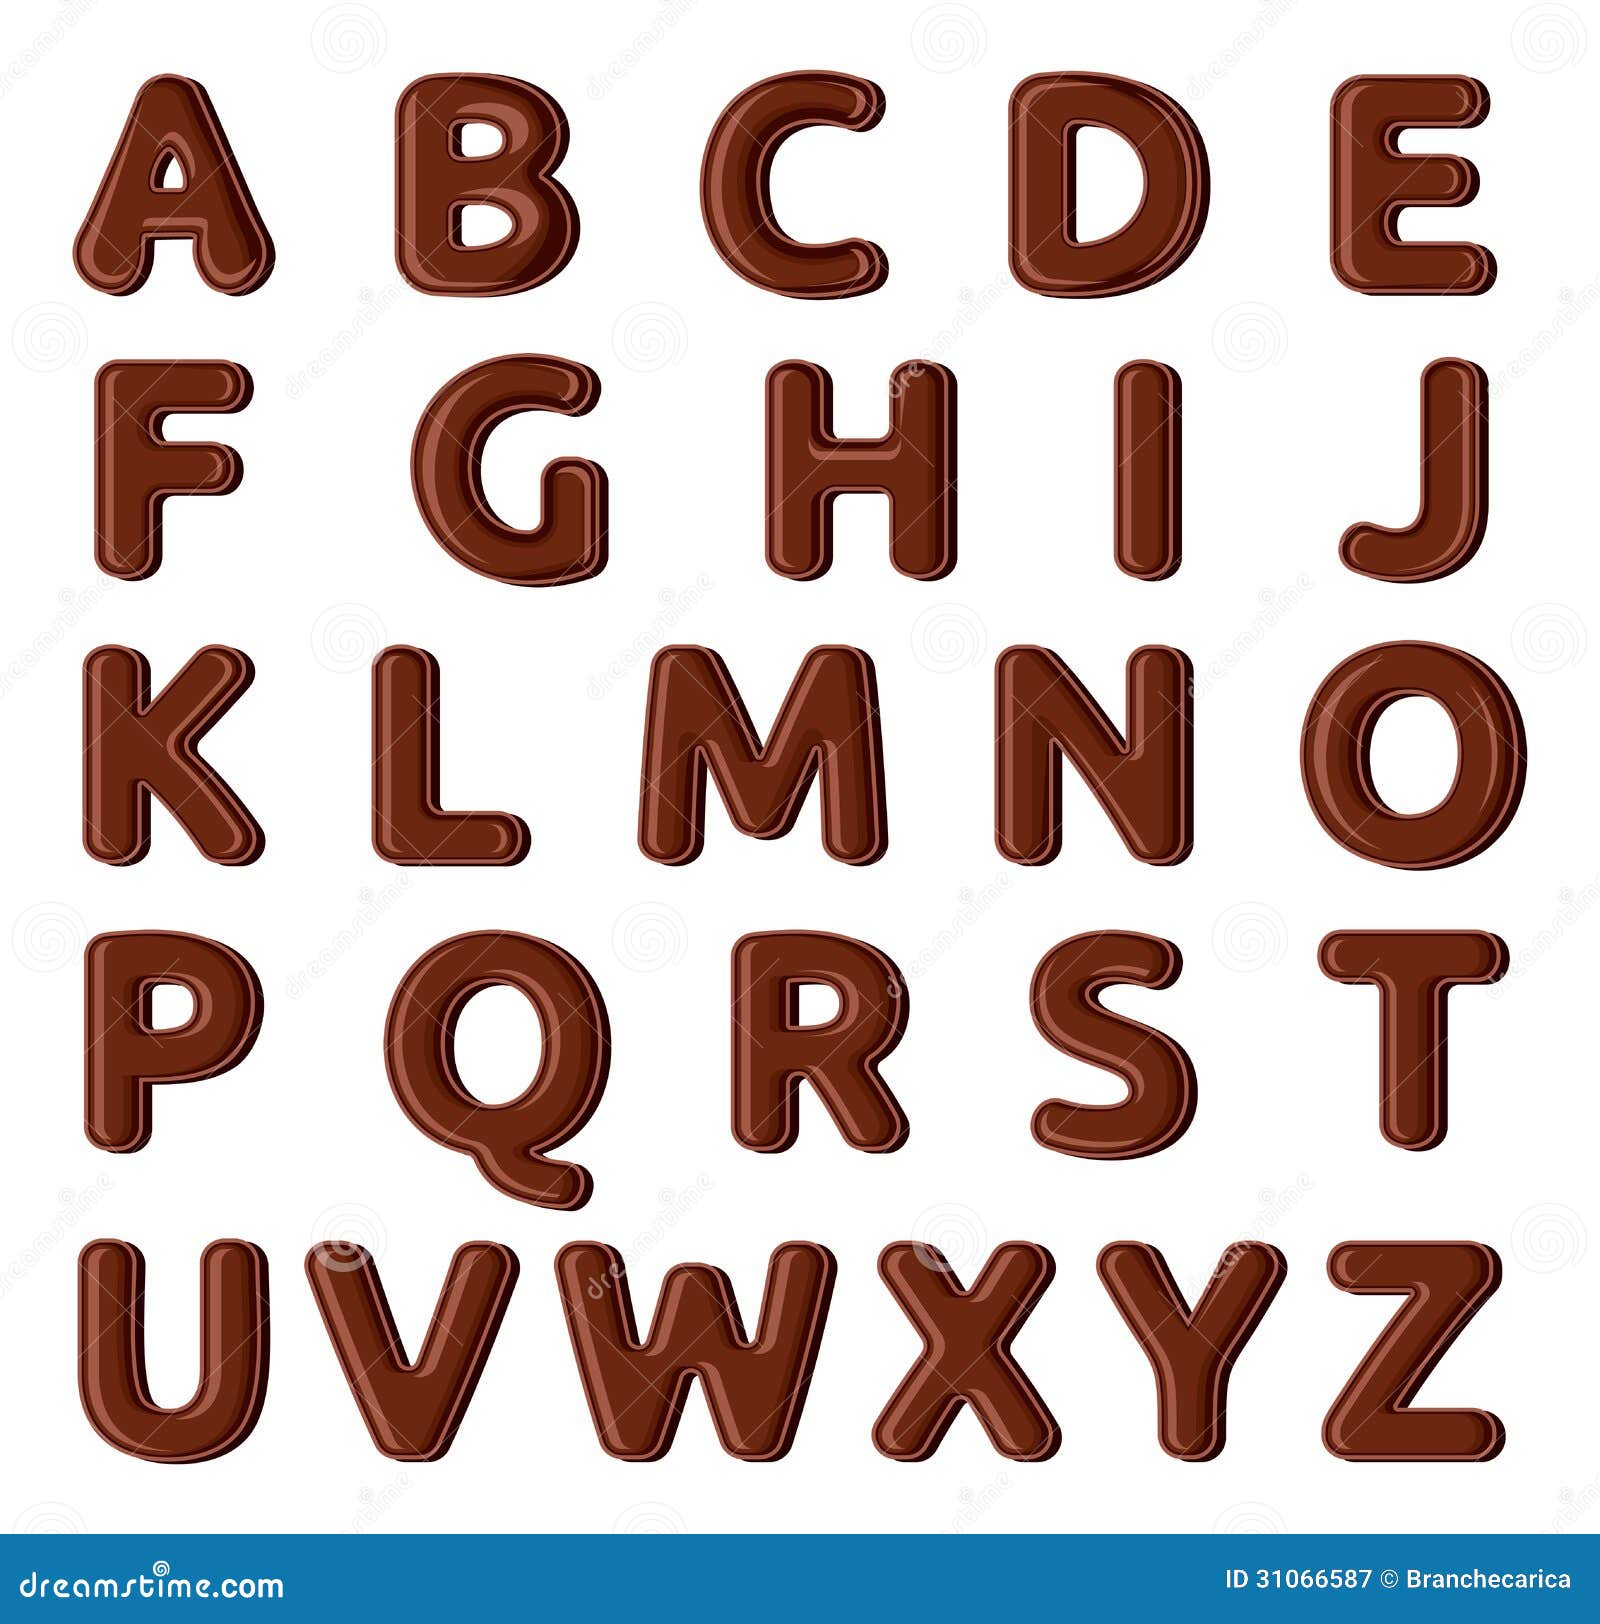 List 96+ Images from a to z in the chocolate alphabet Stunning